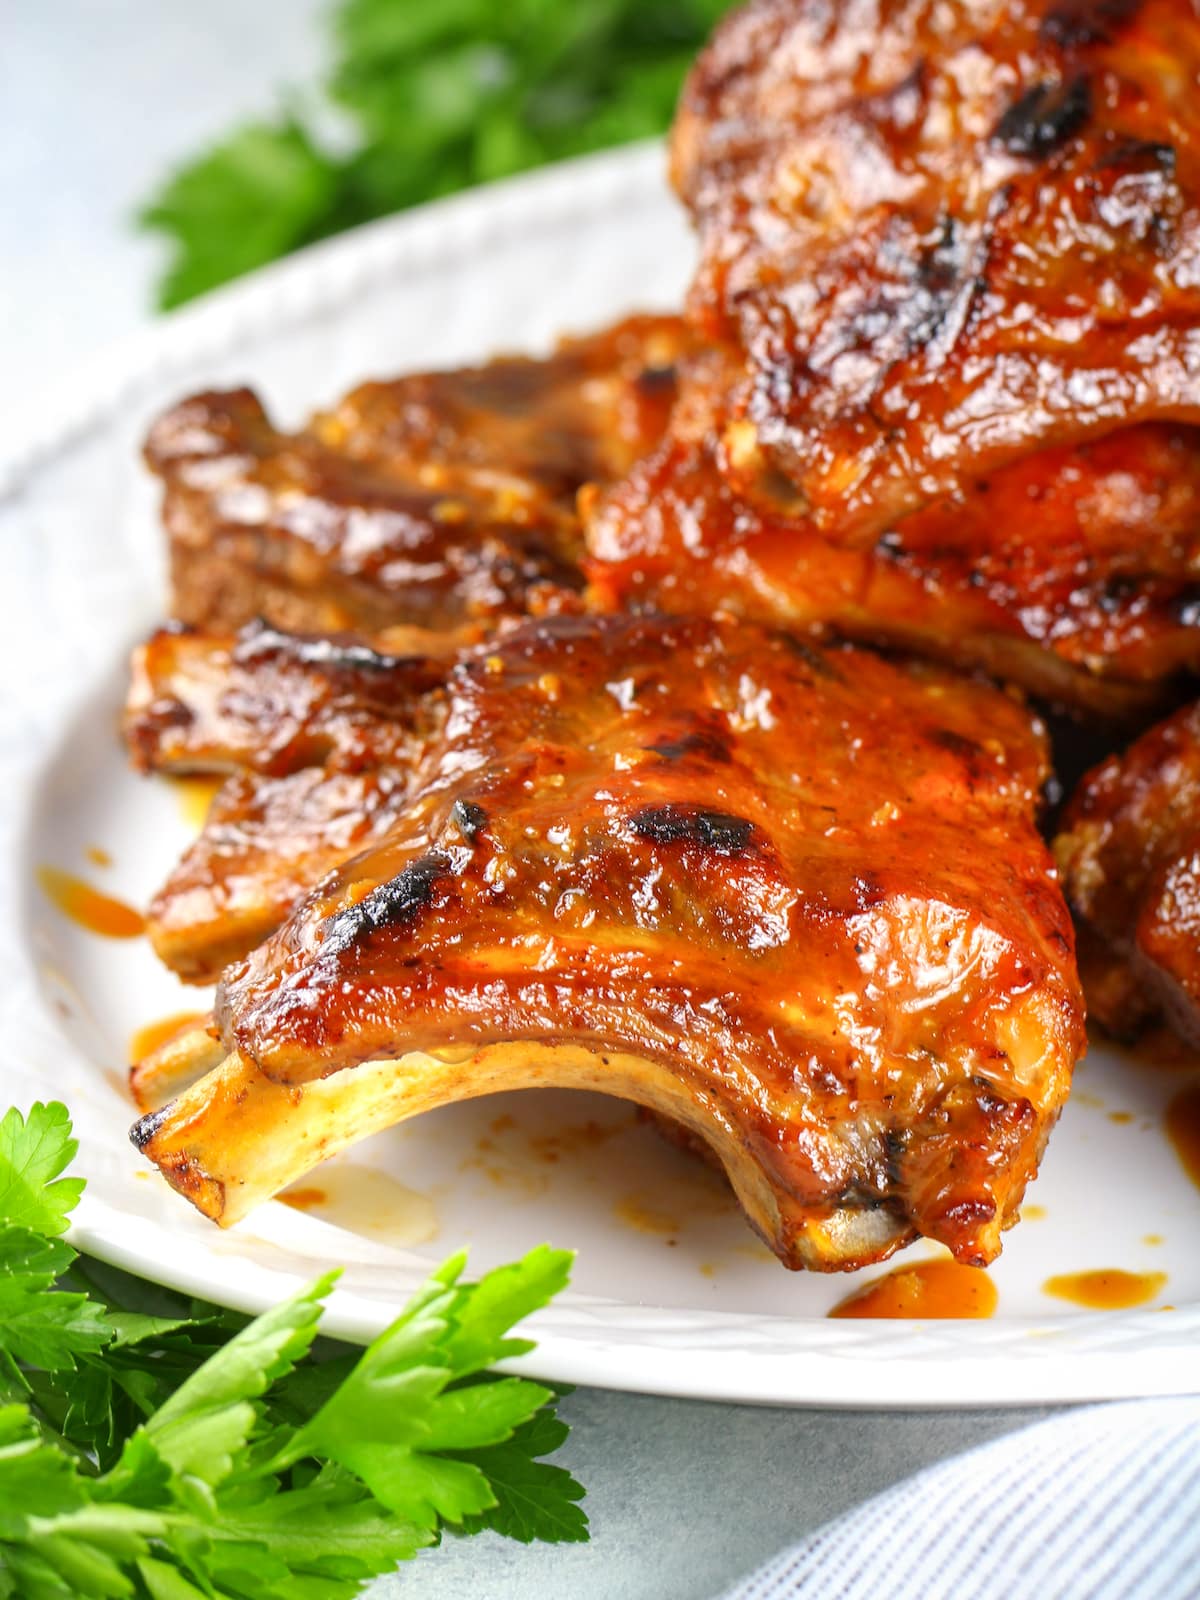 A close-up photo of ribs coated in sauce on a platter.